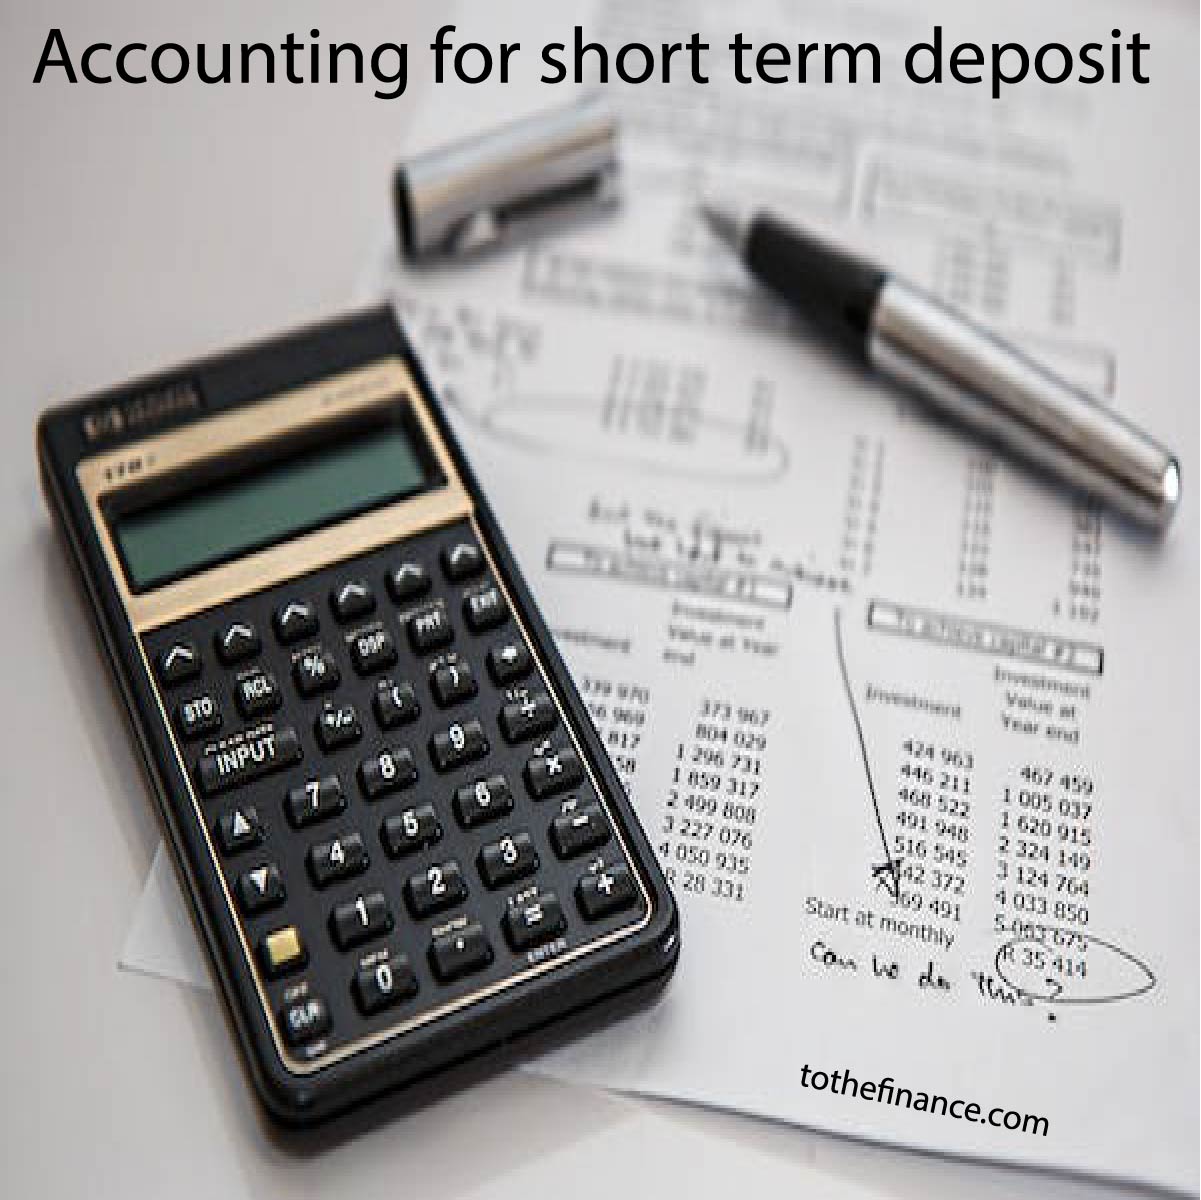 Accounting for short term deposit